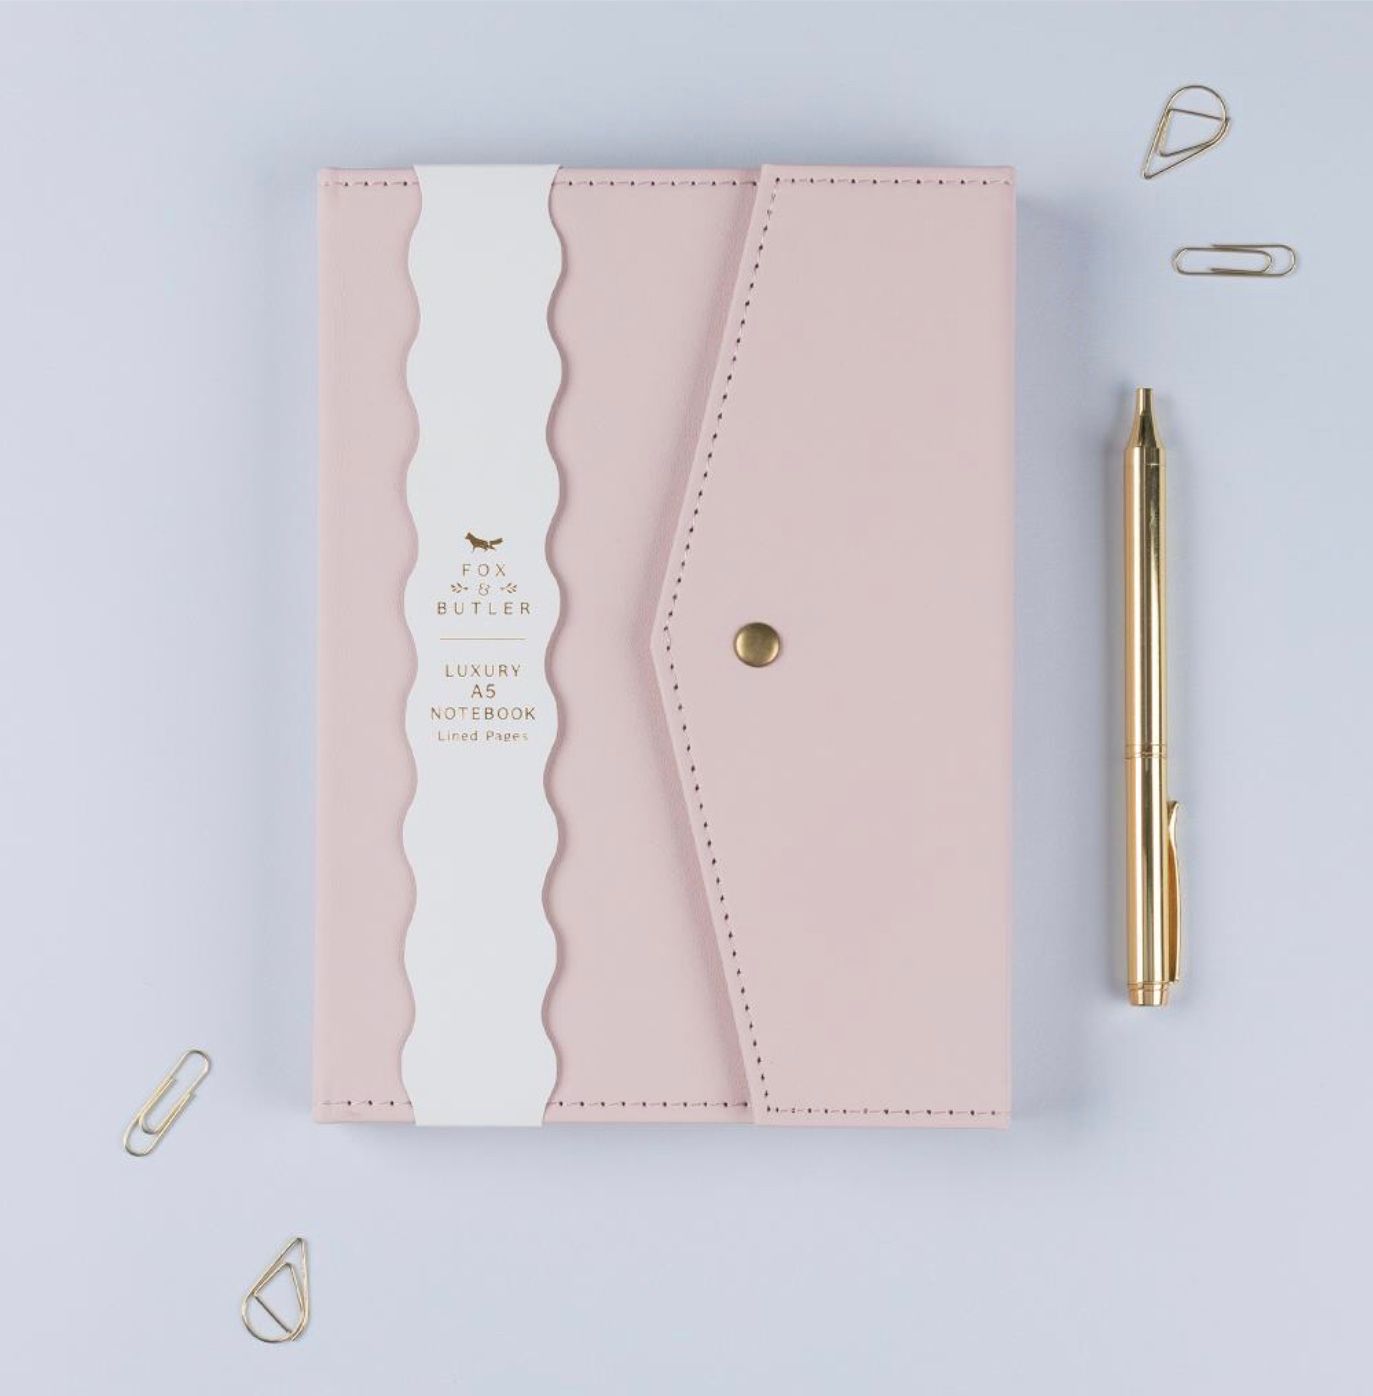 Stationery from Fox & Butler